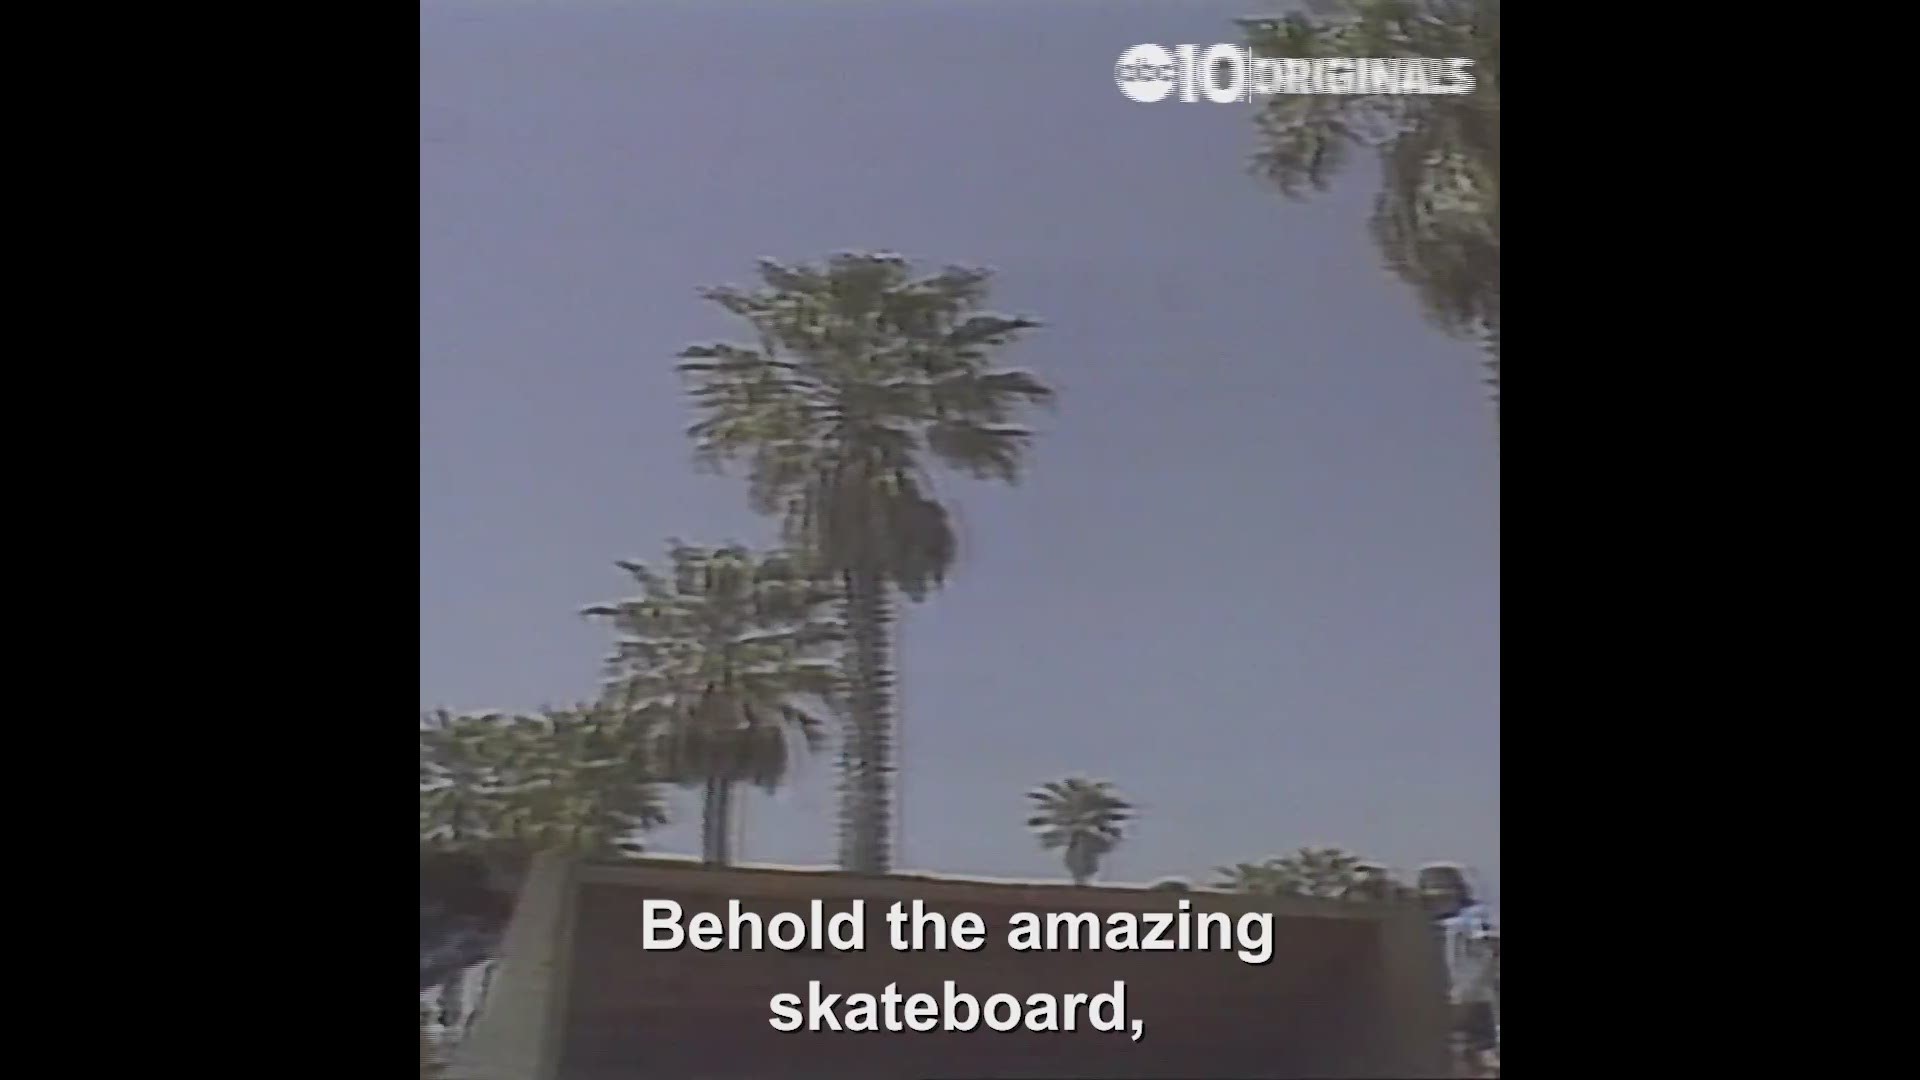 #ThrowbackThursday: Learning about skateboarding from a 19-year-old Tony Hawk in 1987.